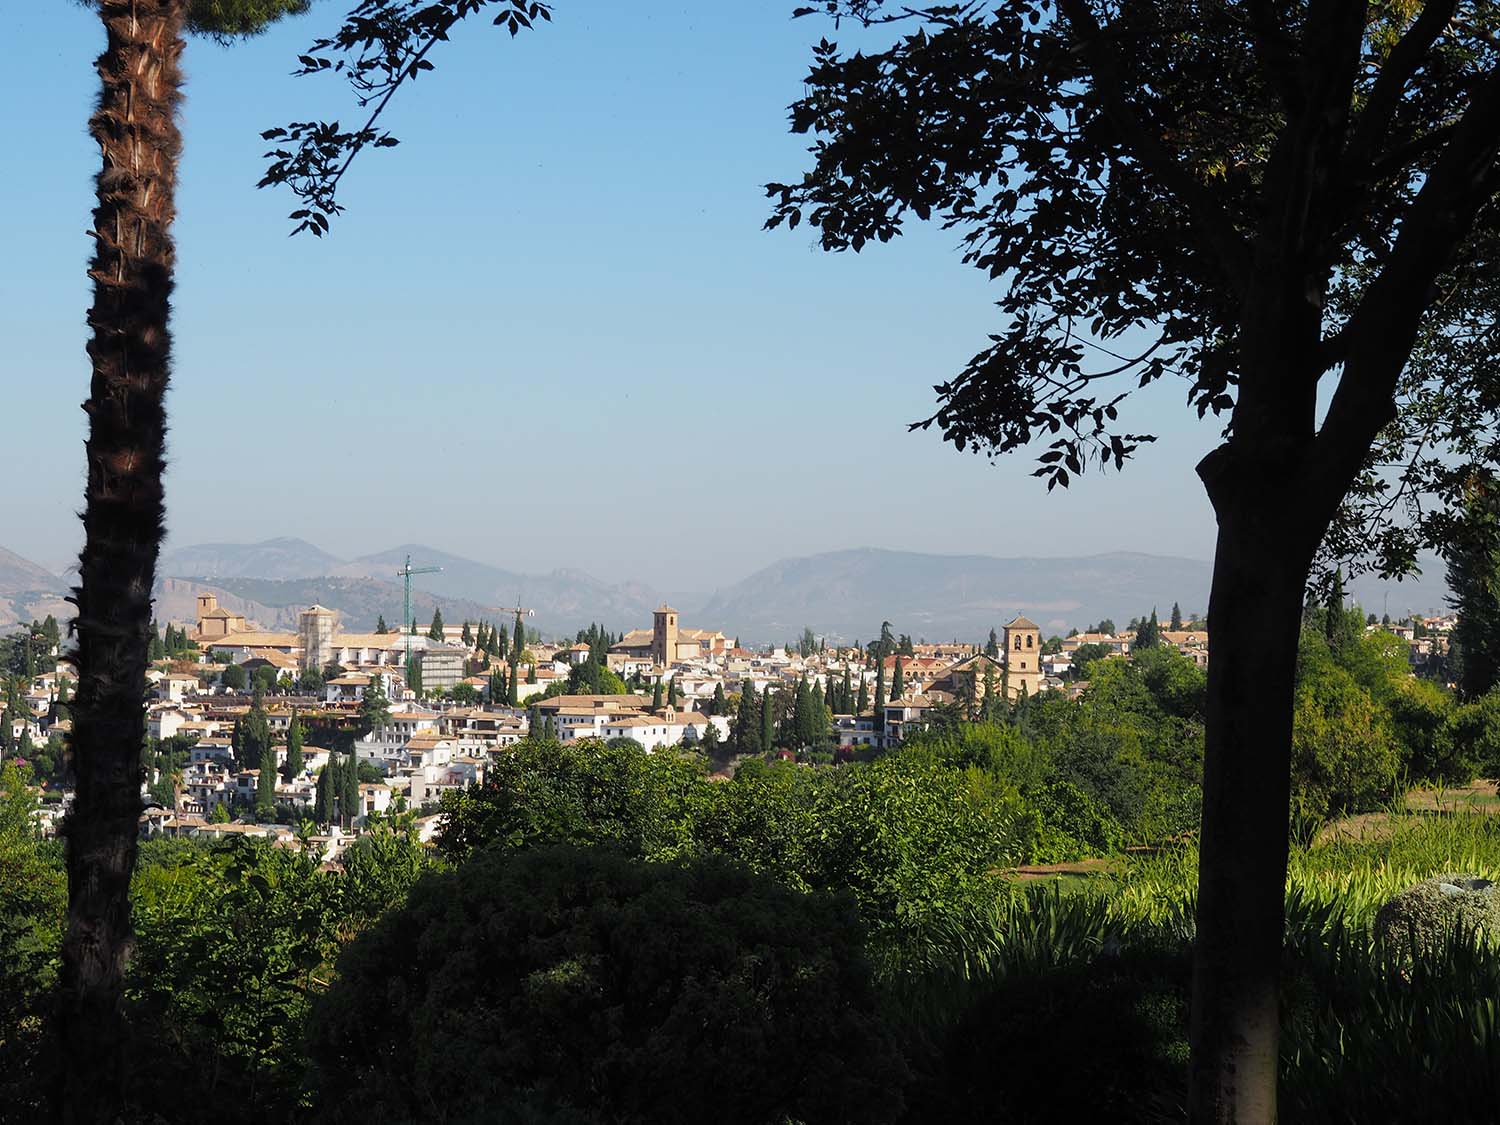 View of Granada from near the Alhambra